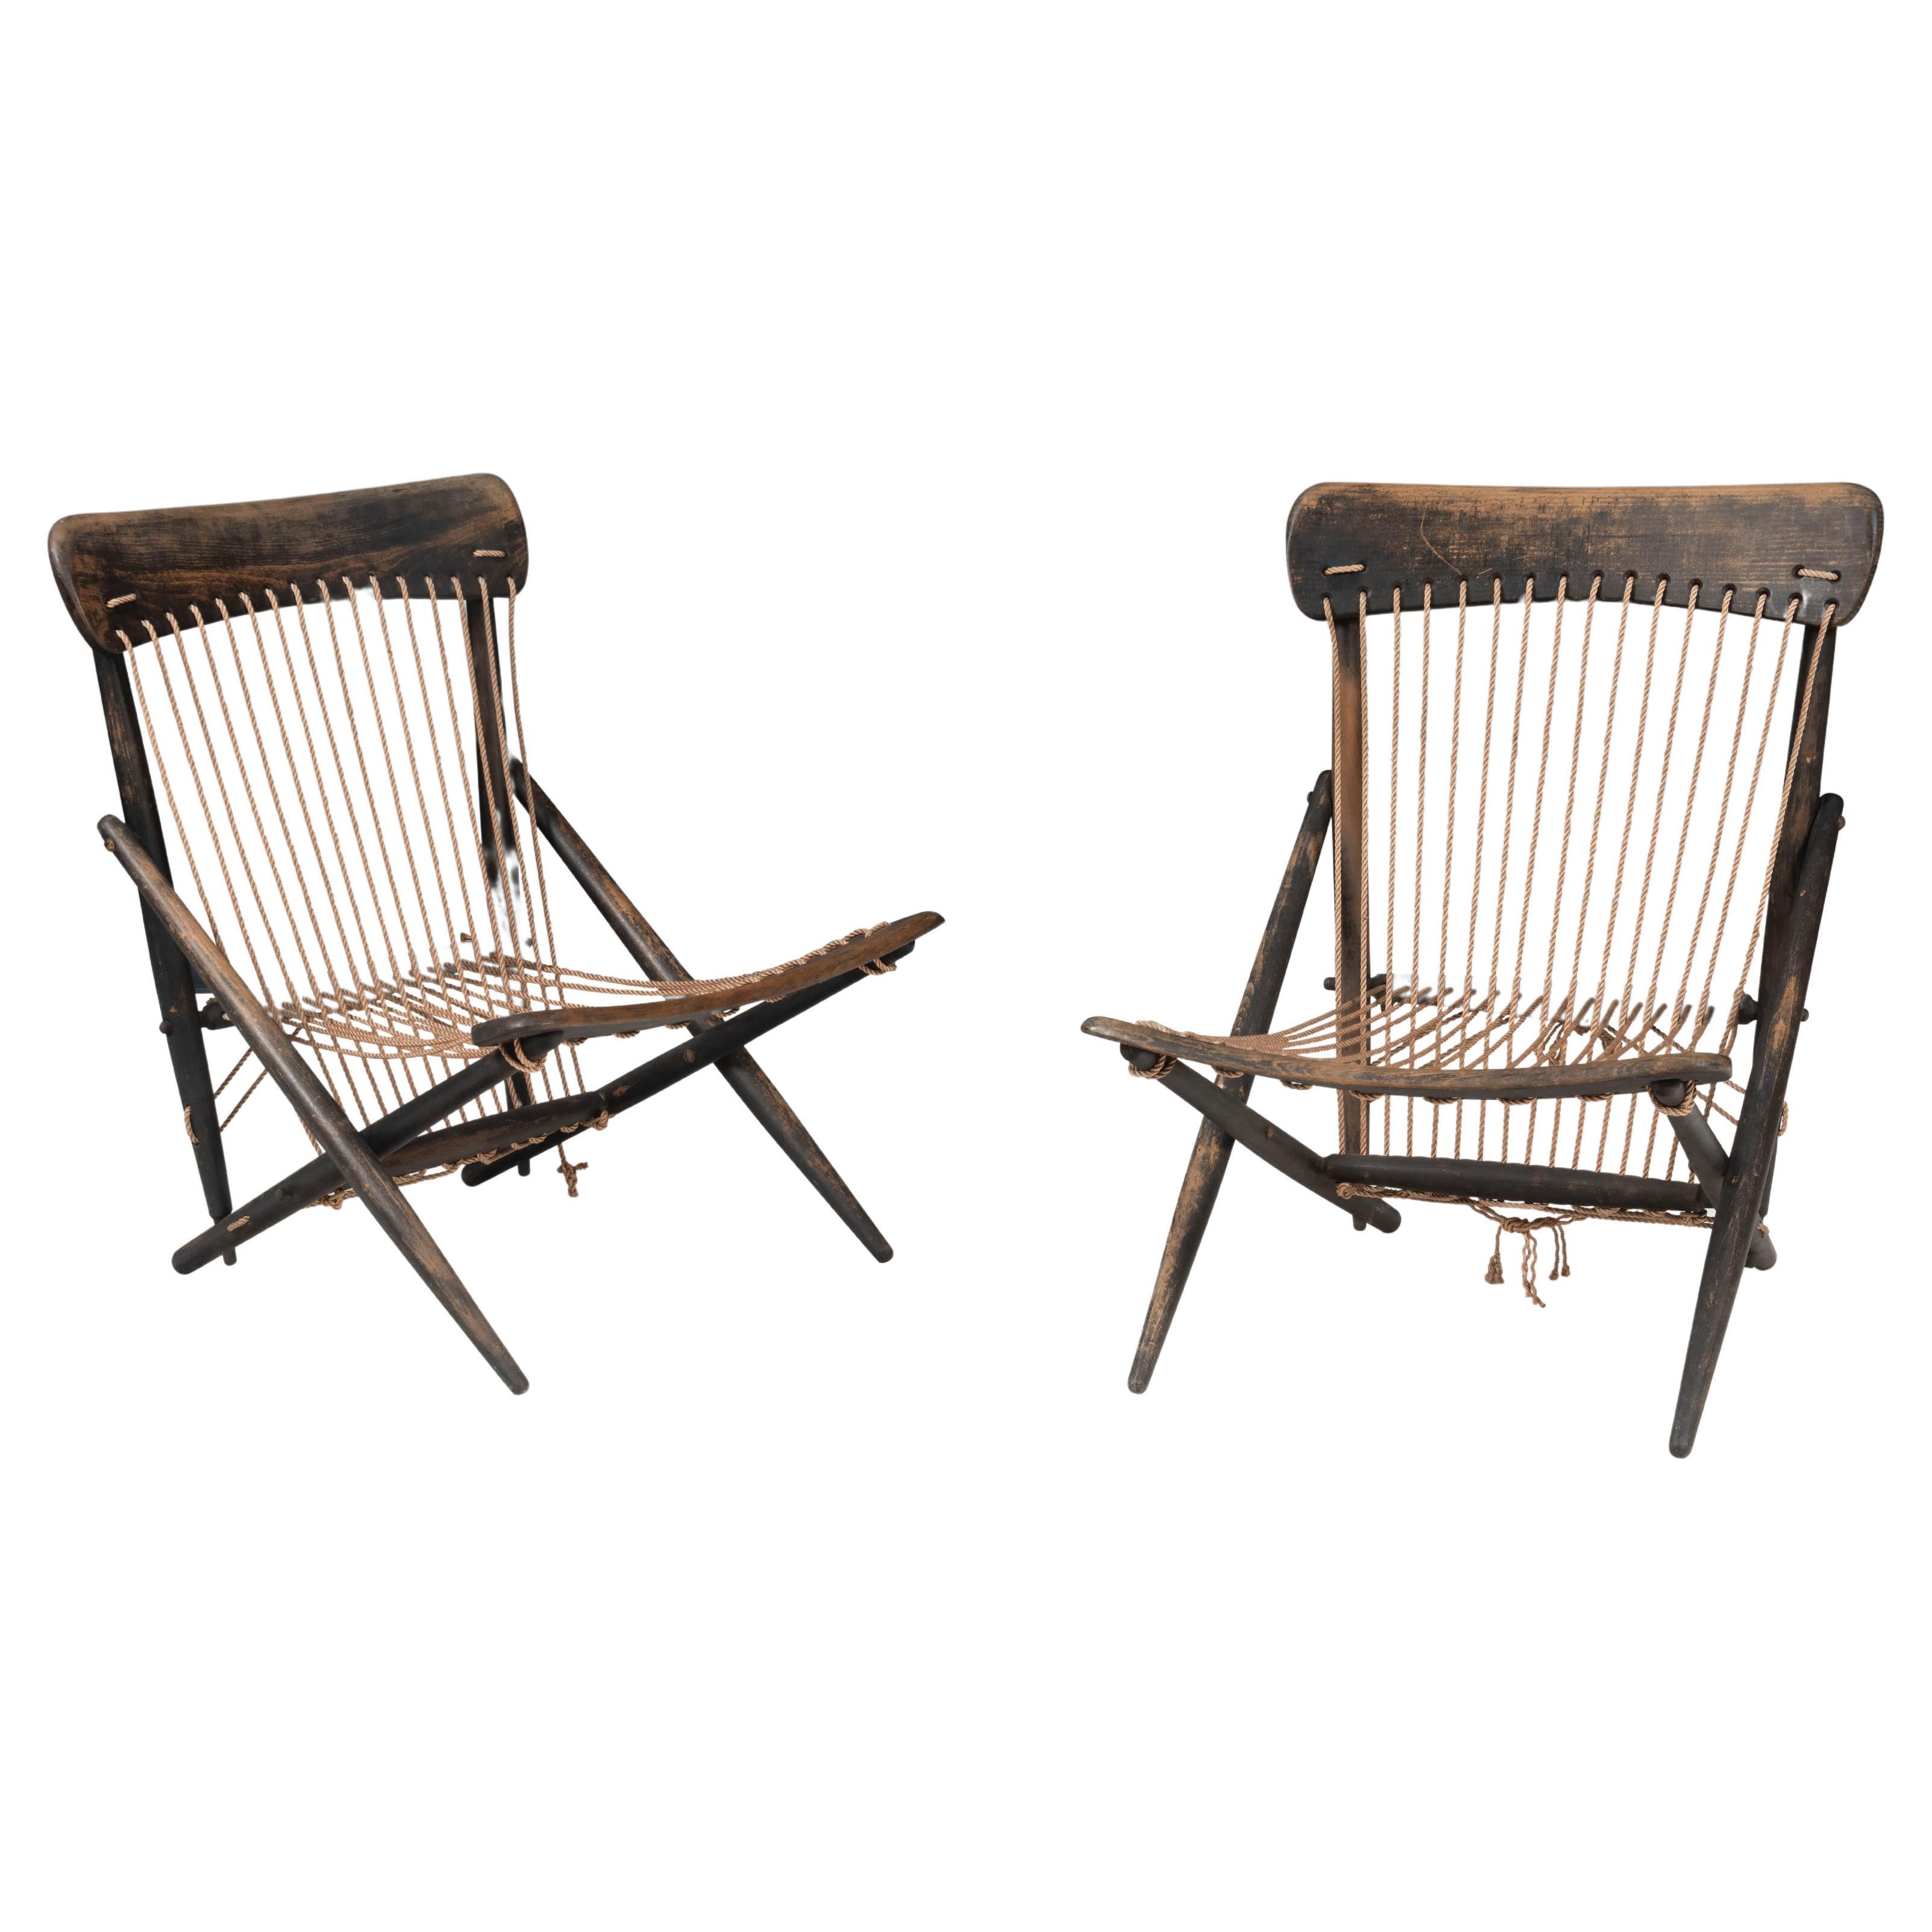 Japanese Midcentury Maruni Pair of Lounge Chairs, 1955 For Sale